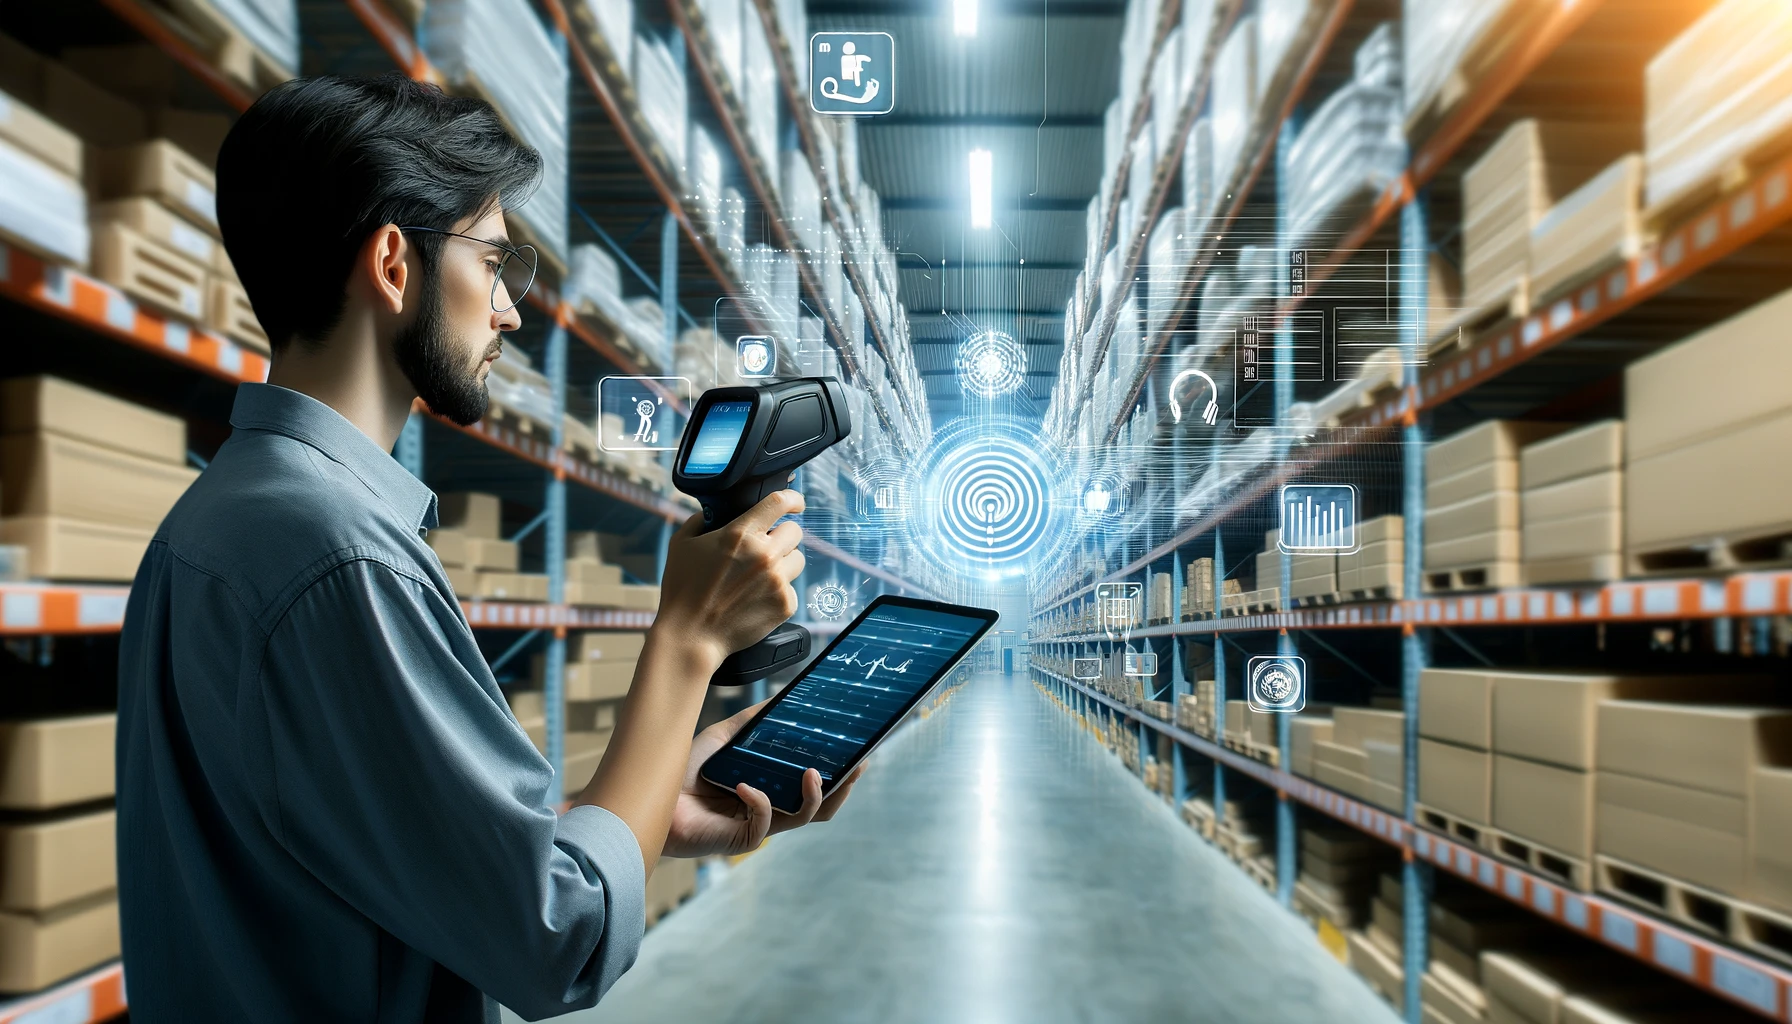 DALL·E 2024-04-15 09.27.33 - A modern warehouse with advanced technology, featuring a worker using a handheld RF scanning device to track inventory. The environment is busy and or